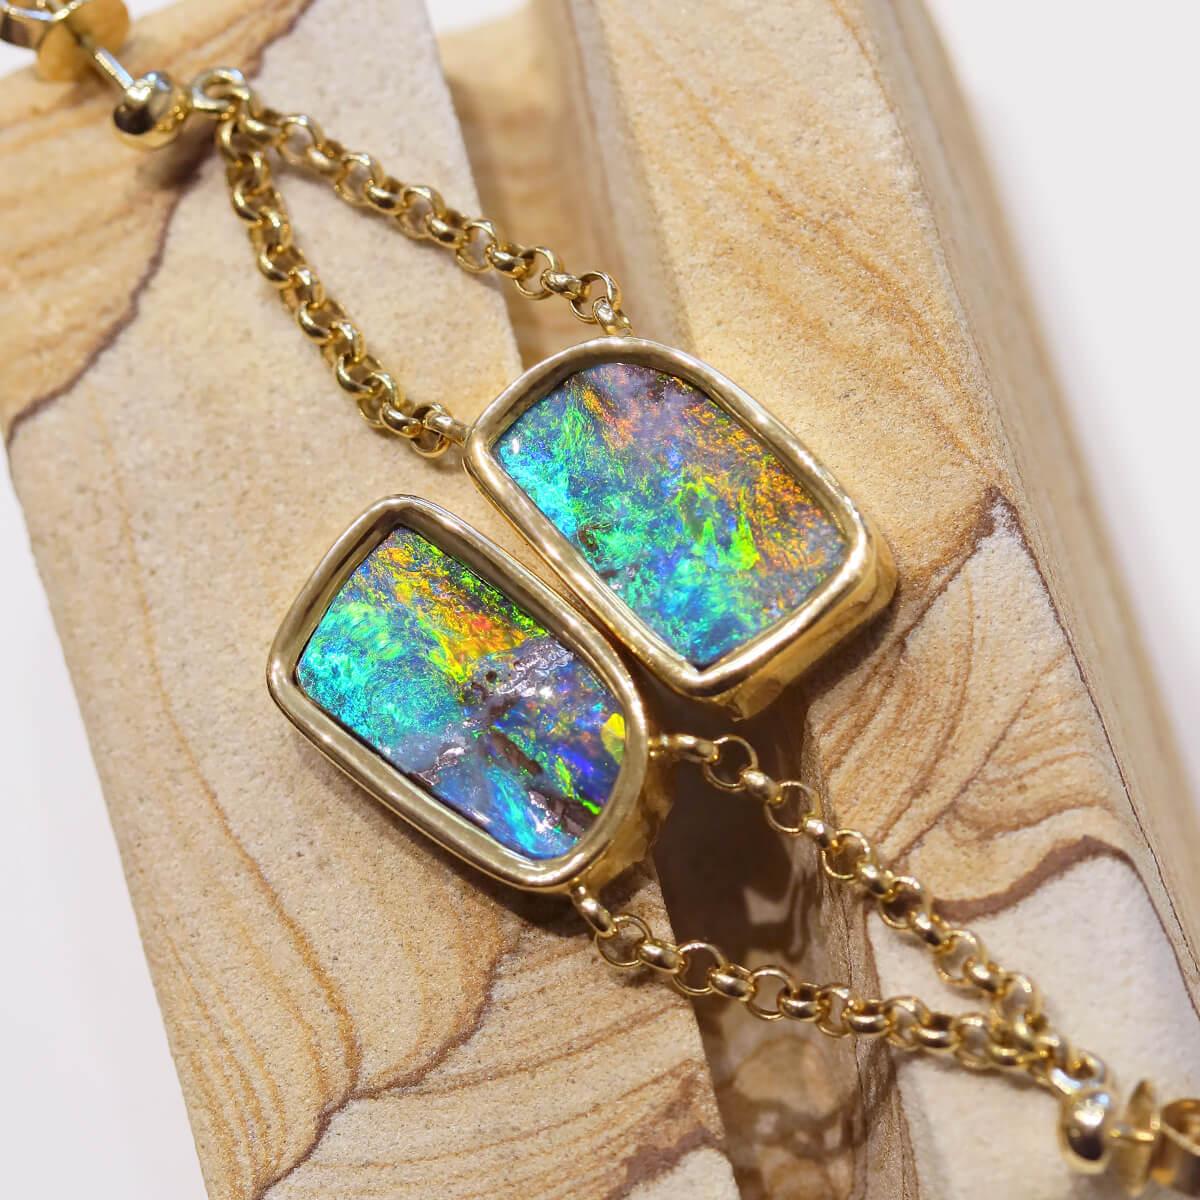 It is so rare to find a matching pair of gem-grade opals, and this shows in the lack of stock everywhere for such beauties. But here is your chance to own heirloom items worthy of passing down through the generations. Such rich and vibrant colours,